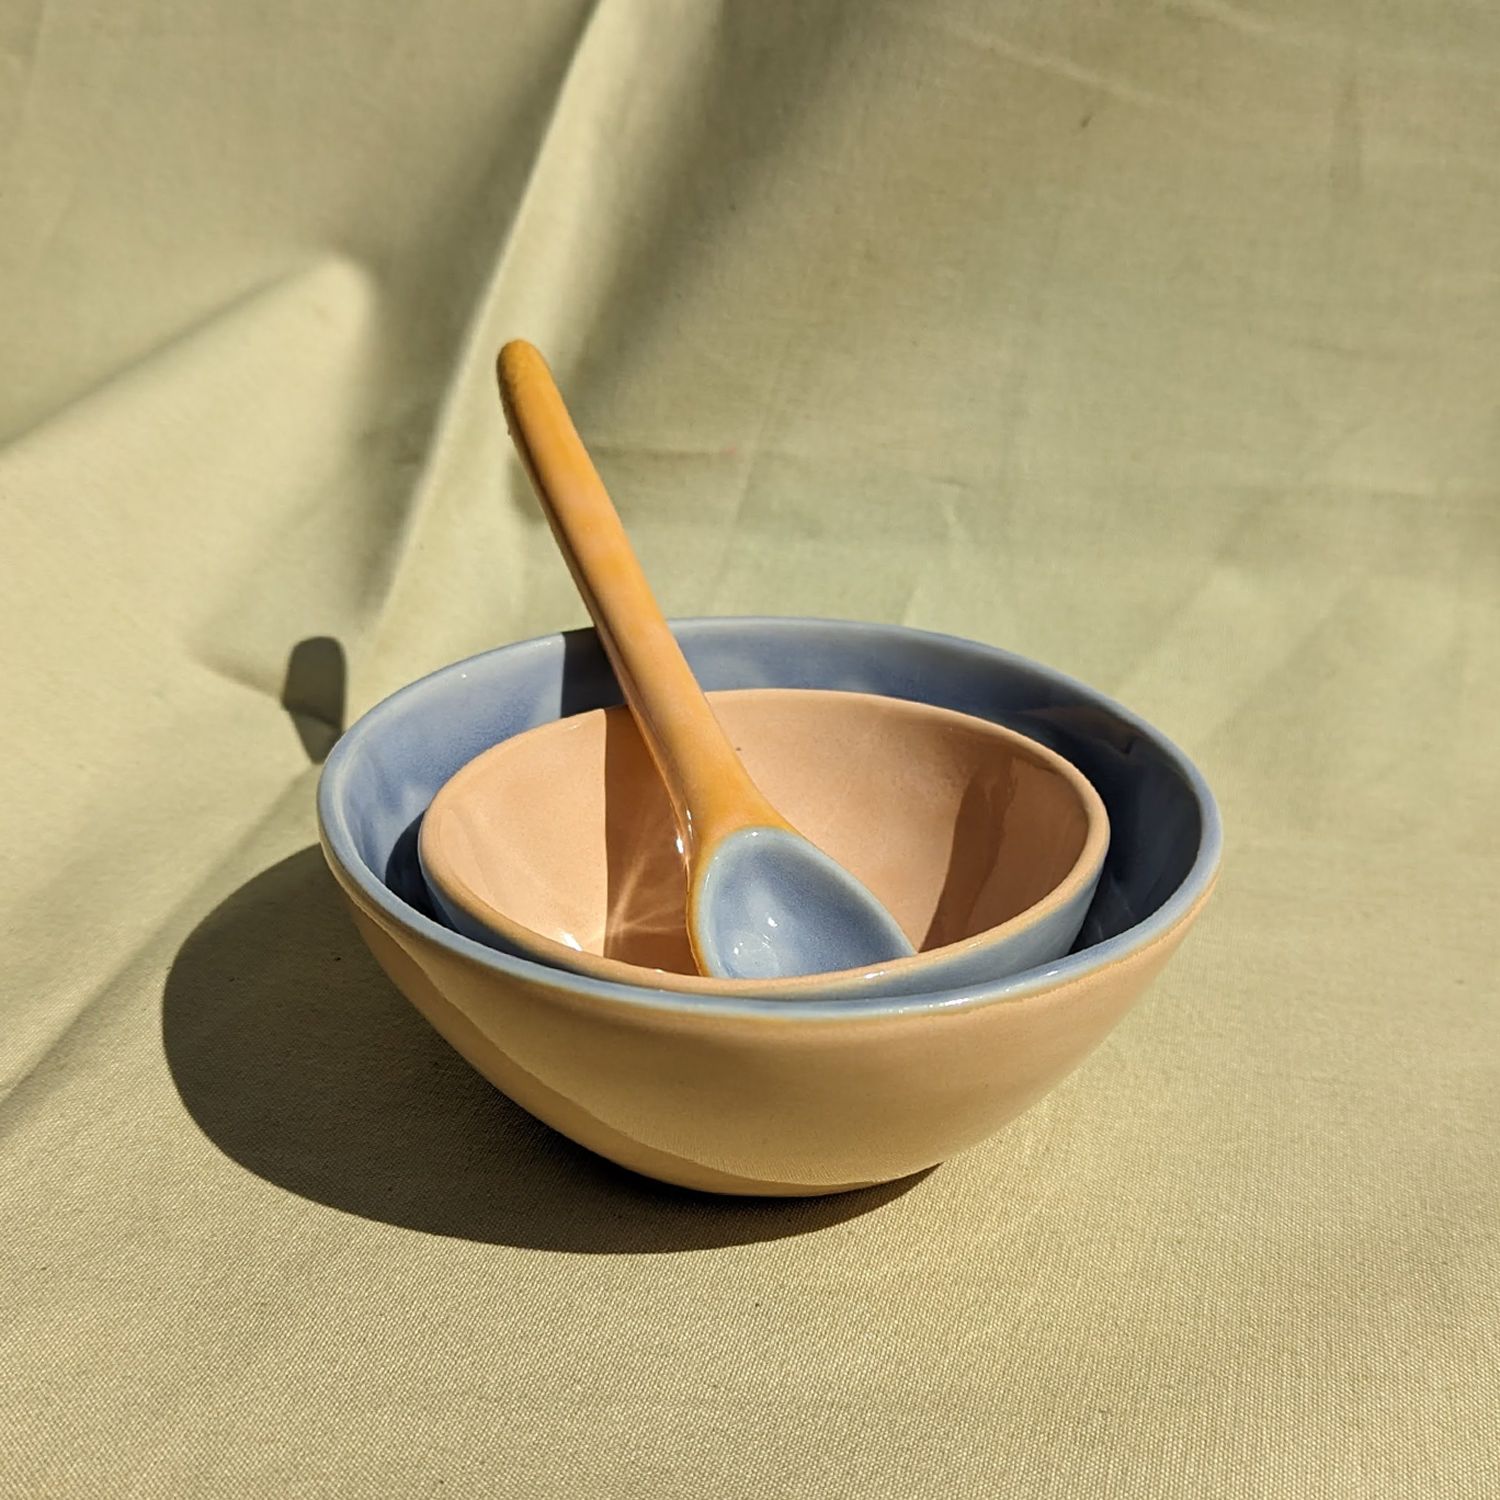 Wendy Nichol: Small Ice Cream Bowl – Assorted Colours Product Image 3 of 5